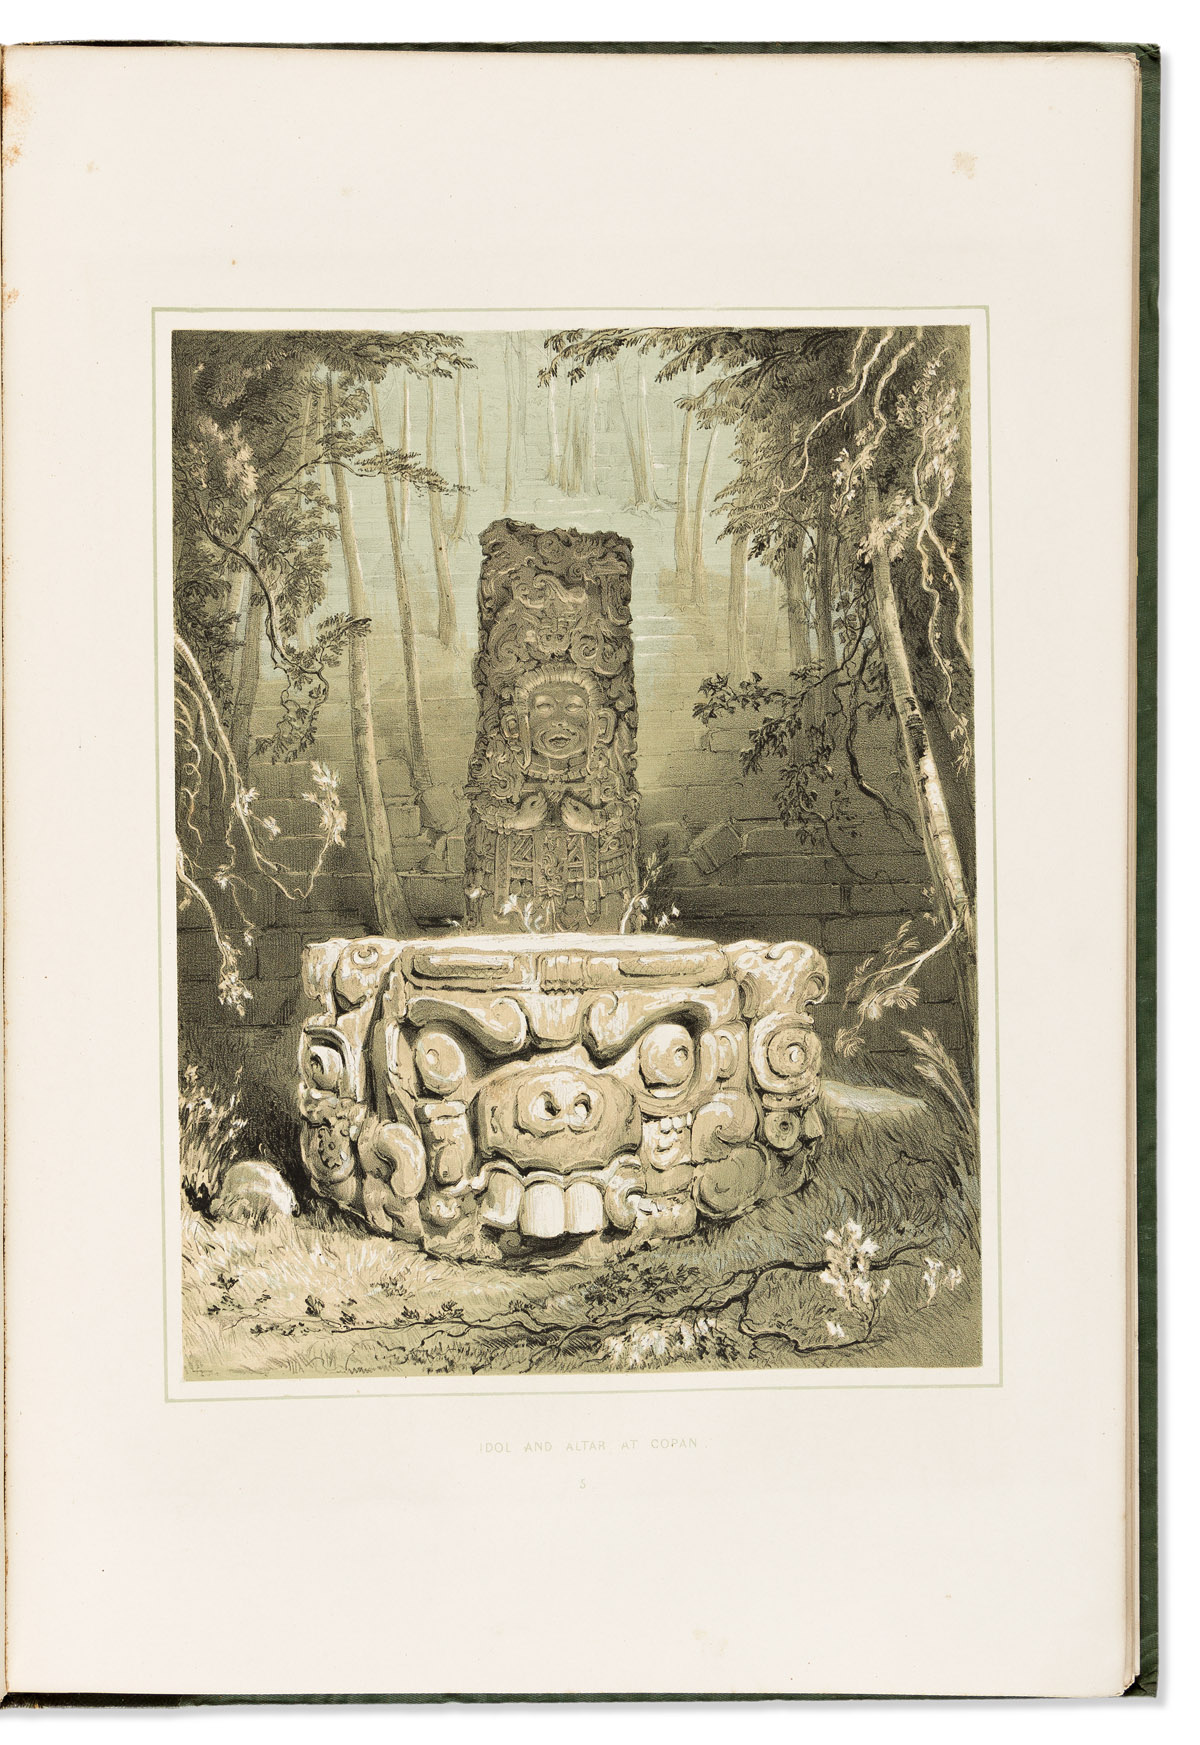 (MEXICO--PLATE BOOKS.) Frederick Catherwood. Views of Ancient Monuments in Central America, Chiapas and Yucatan.